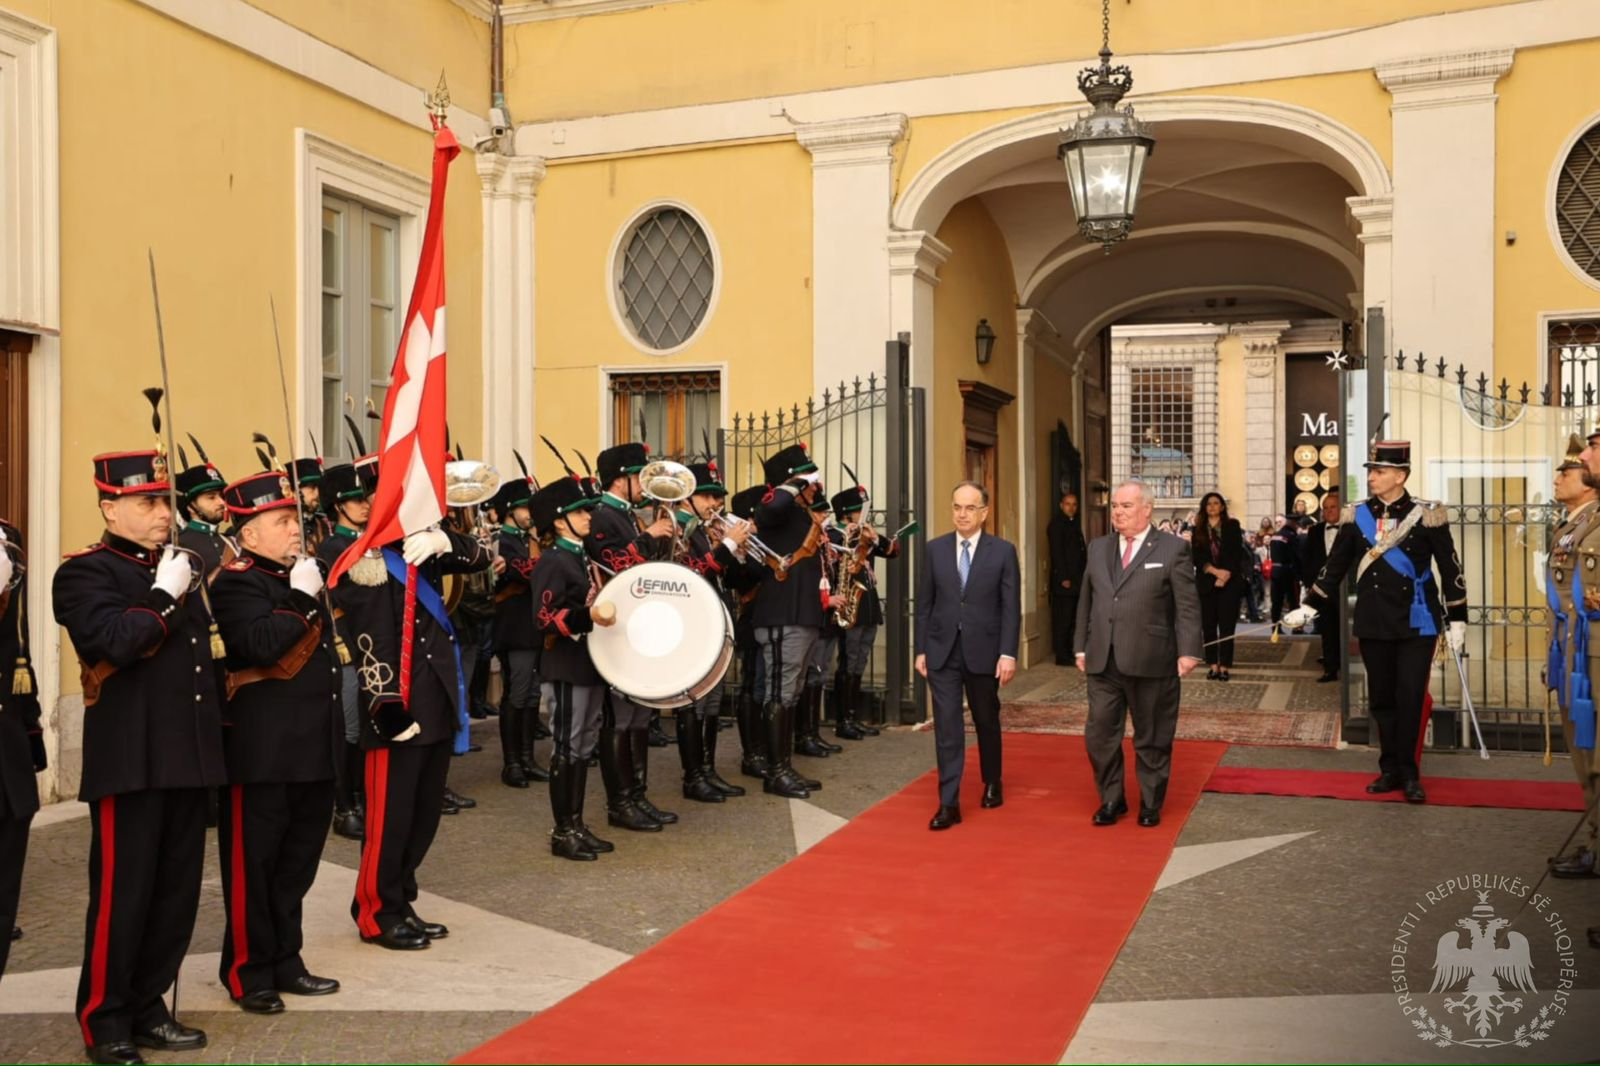 President Begaj’s Official Visit to the Sovereign Military Order of Malta on the 30th Anniversary of Diplomatic Relations with Albania